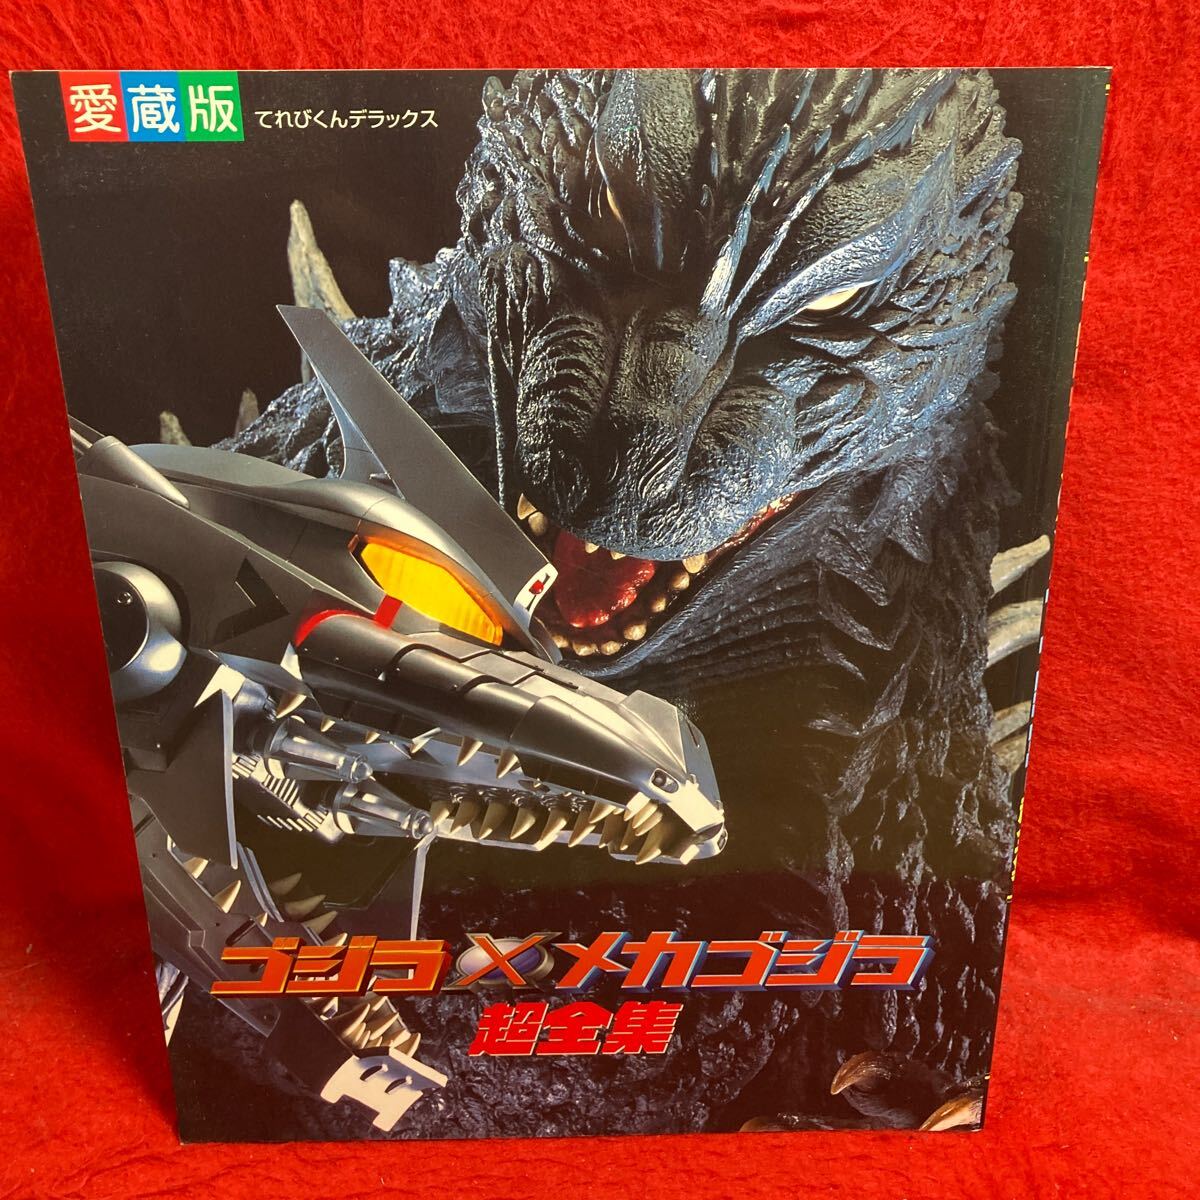 V collector's edition GODZILLA Godzilla × Mechagodzilla super complete set of works ... kun Deluxe 2003 year the first version water .. beautiful machine dragon decision war name place surface huge living thing illustrated reference book etc. publication 